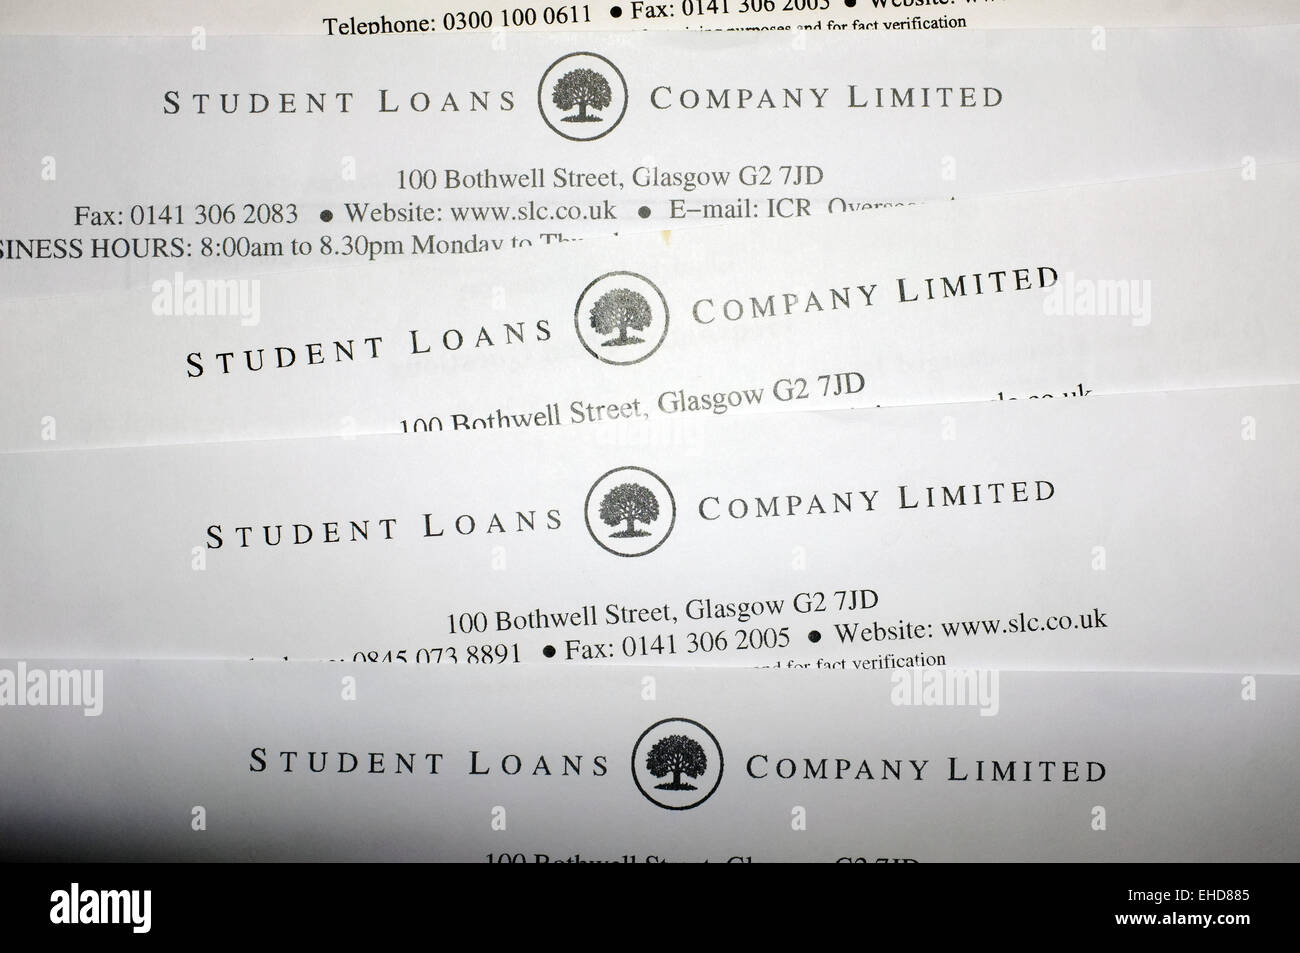 Student Loans Company Limited letterhead paperwork. Stock Photo